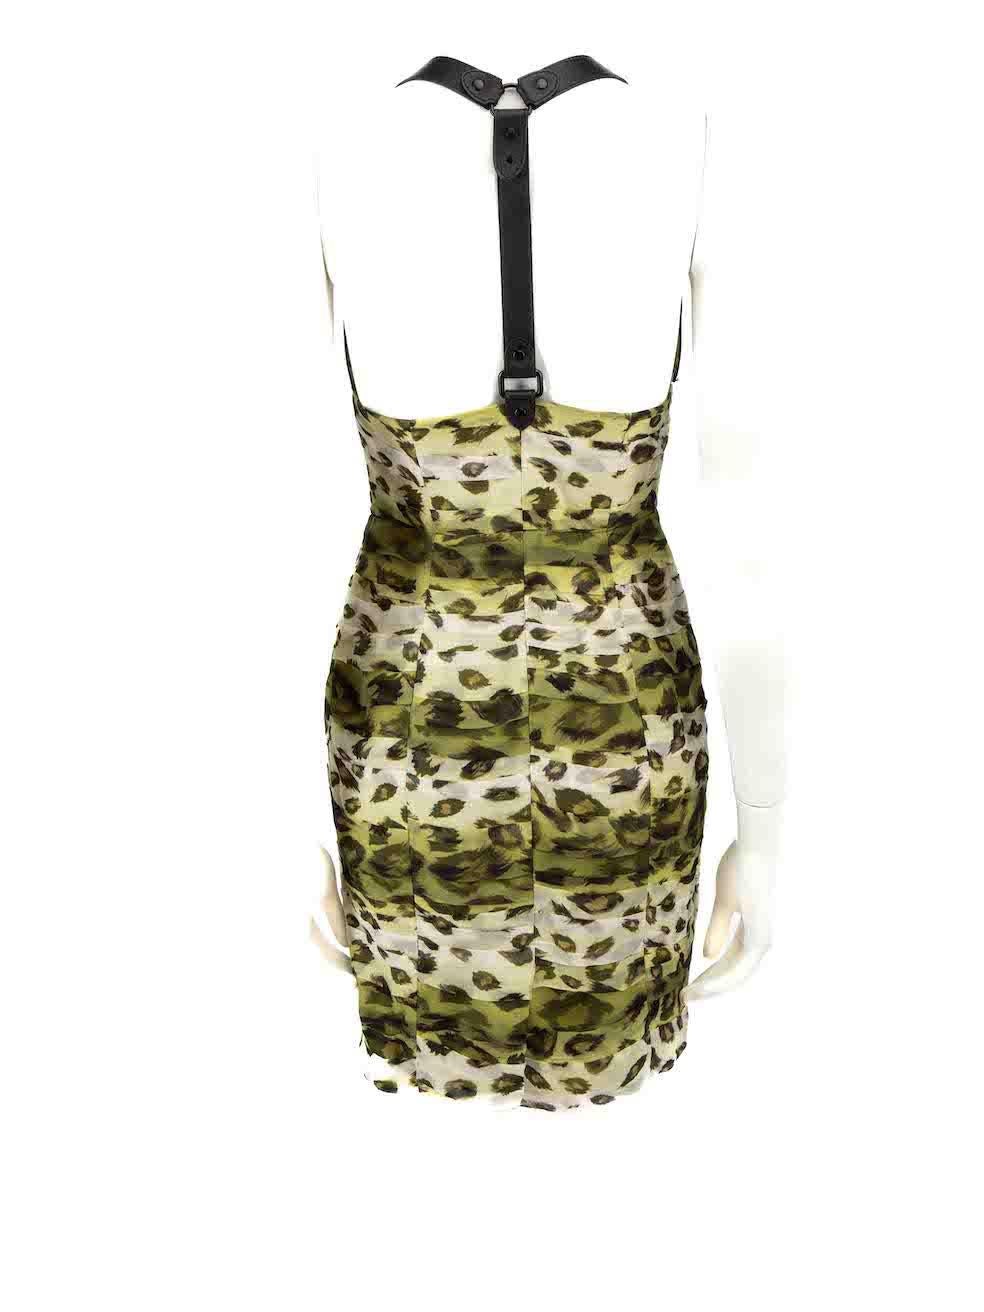 Burberry Burberry Prorsum Green Leather Strap Leopard Pattern Mini Dress Size XS In Excellent Condition For Sale In London, GB